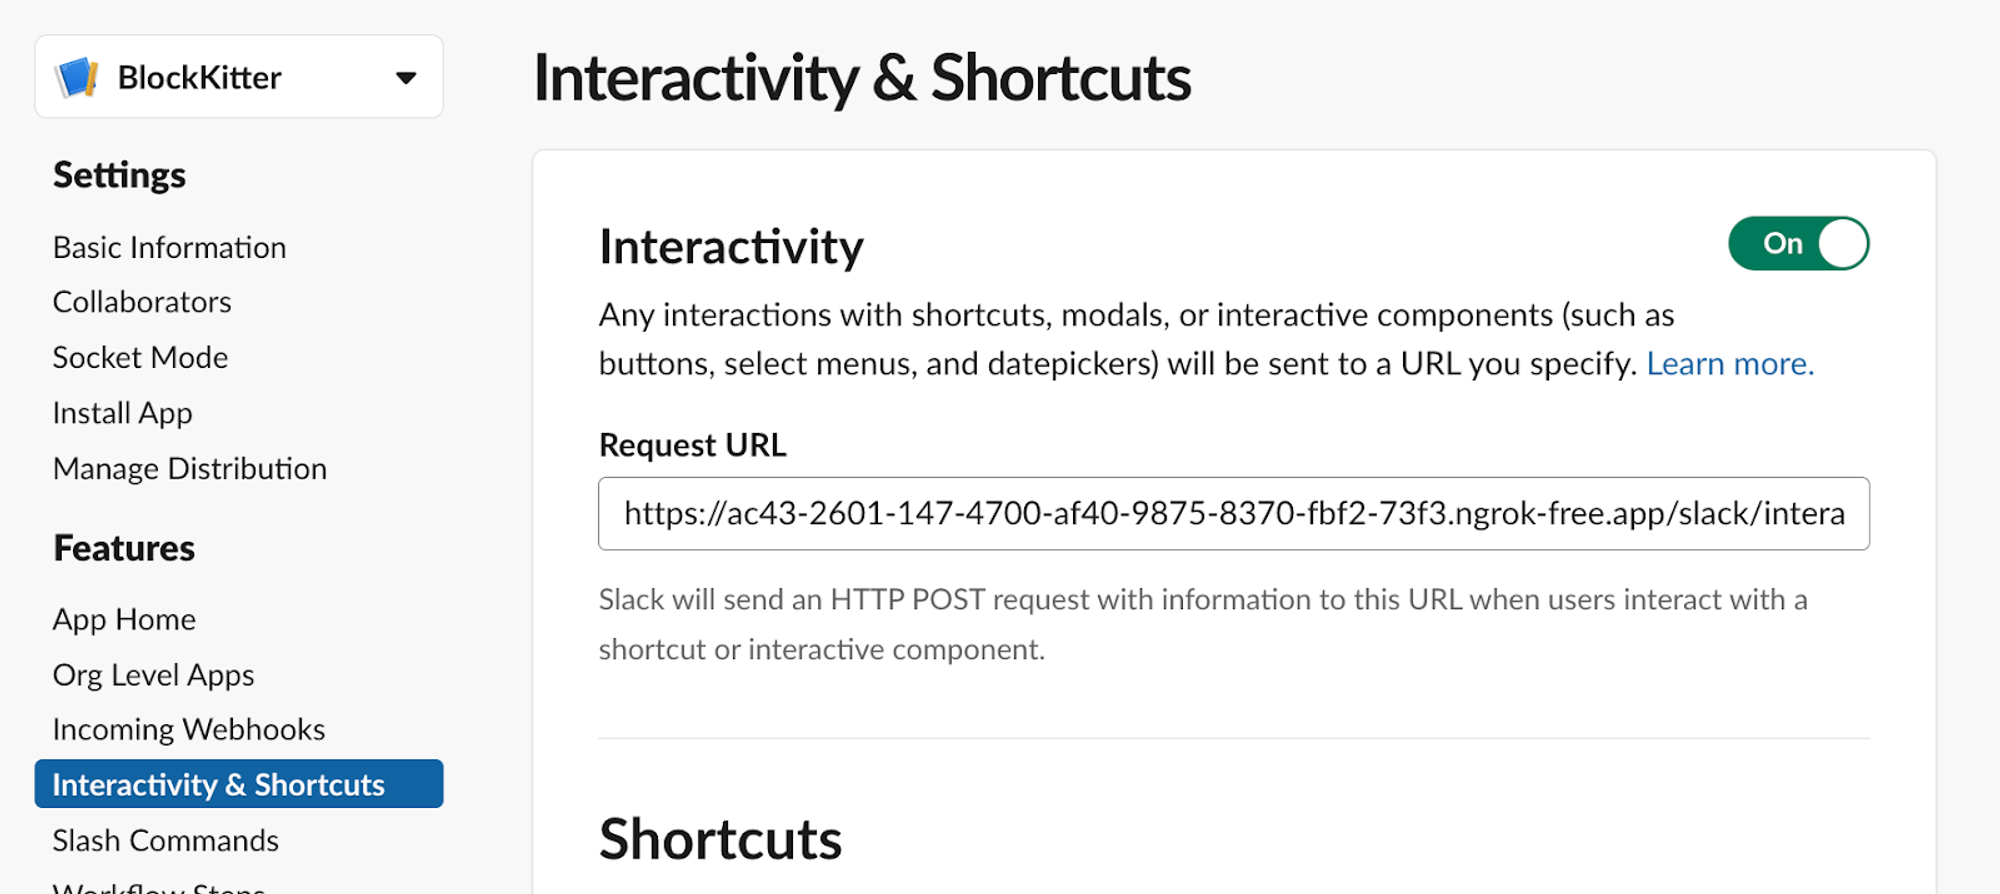 Setting a URL to handle interactivity from Slack